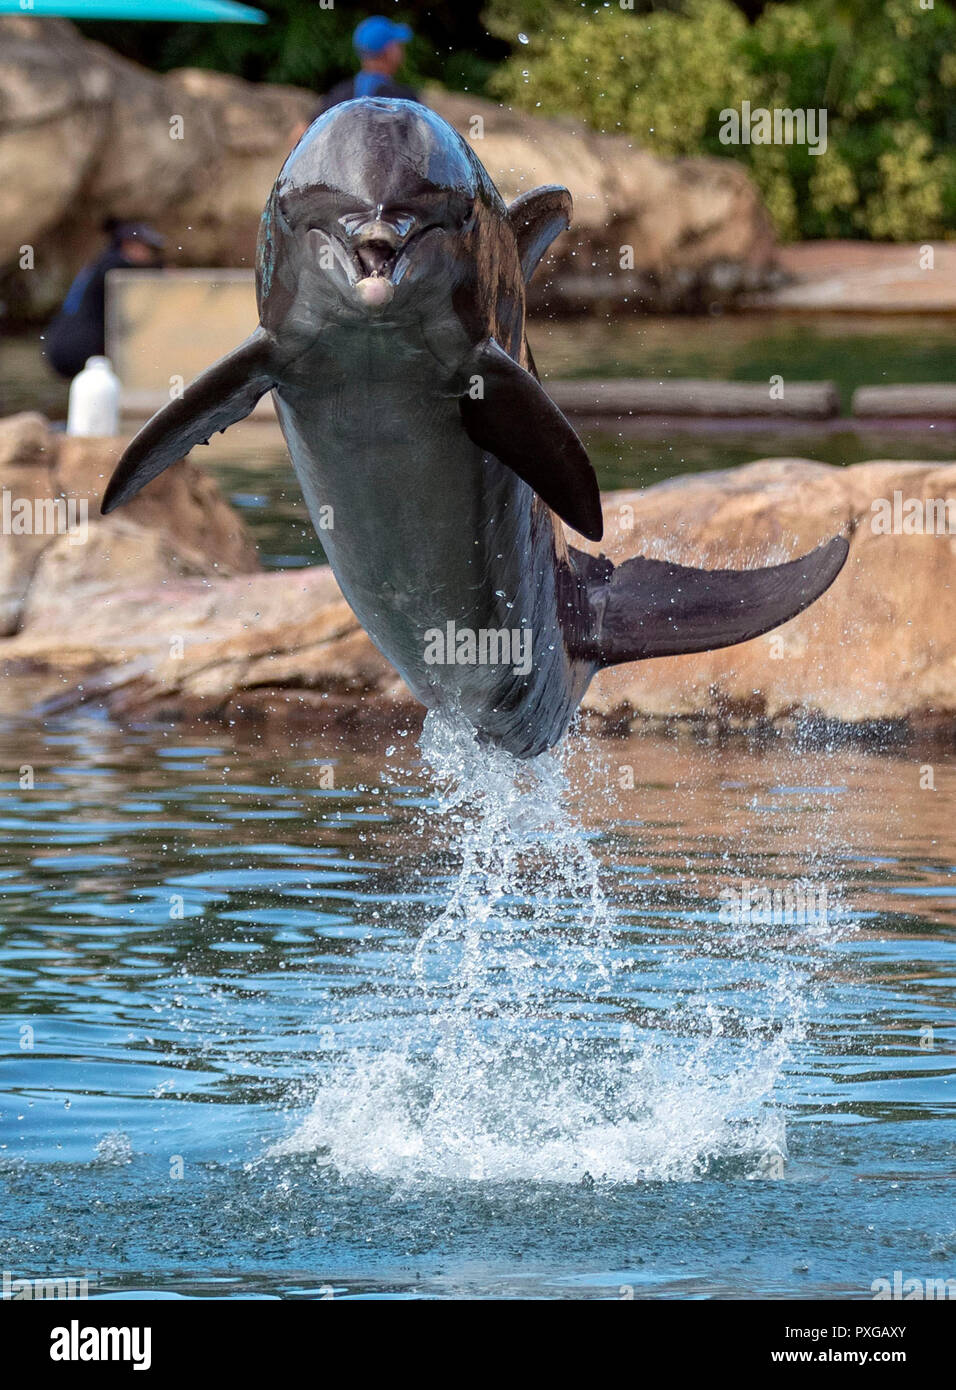 Dolphin jump during the Dreamflight visit to Discovery Cove in Orlando, Florida. Stock Photo